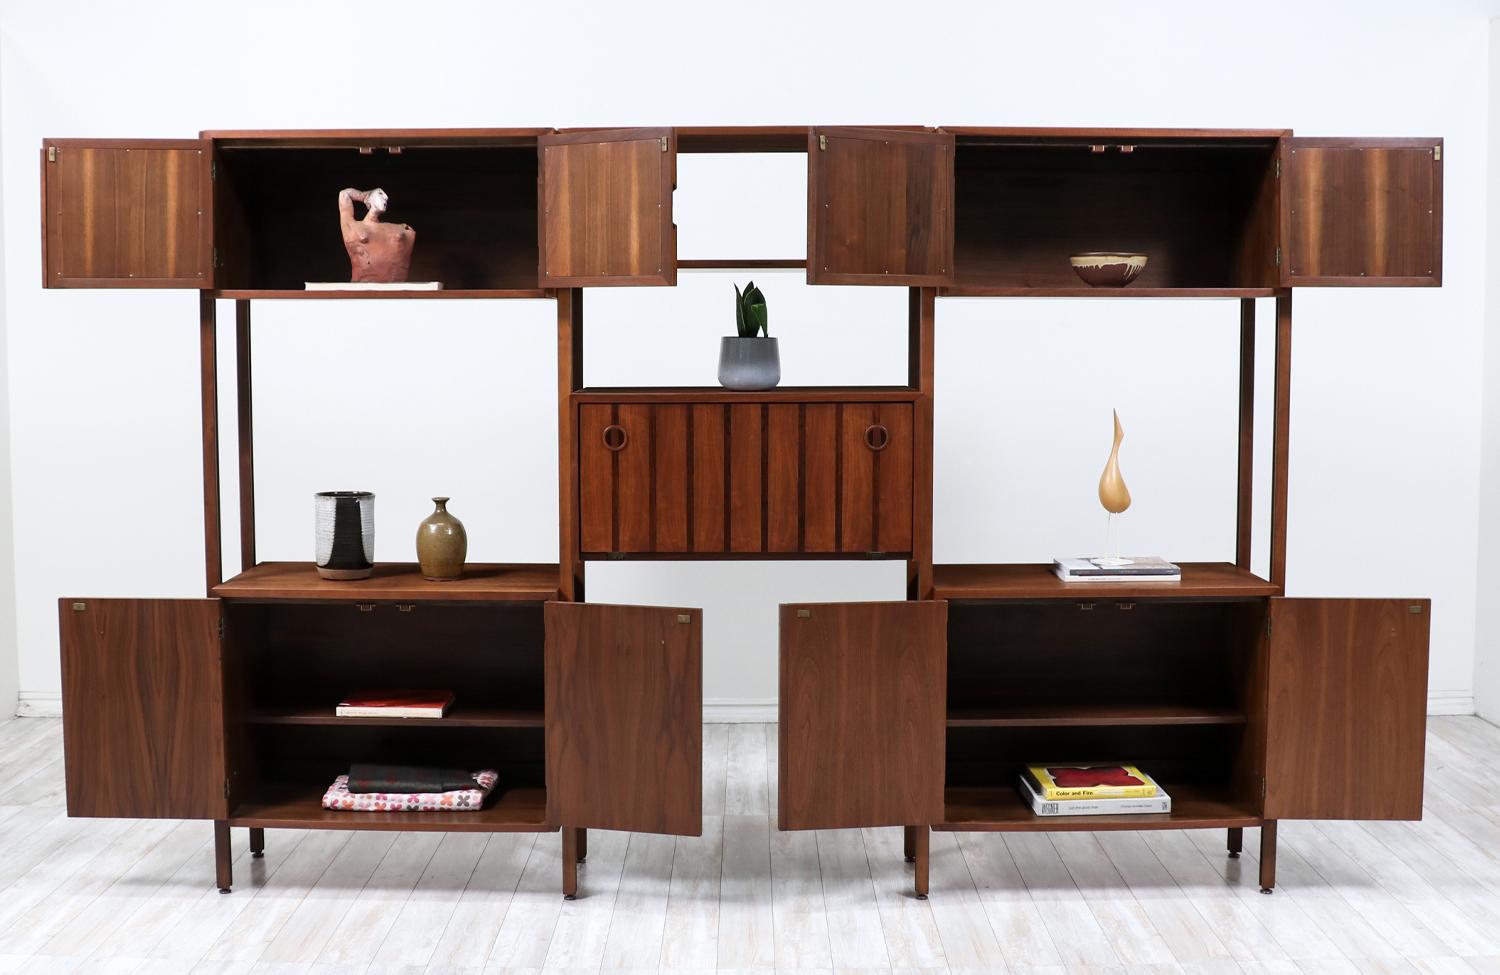  Expertly Restored - Mid-Century Modern Walnut Free-Standing Bookshelf Unit In Excellent Condition For Sale In Los Angeles, CA